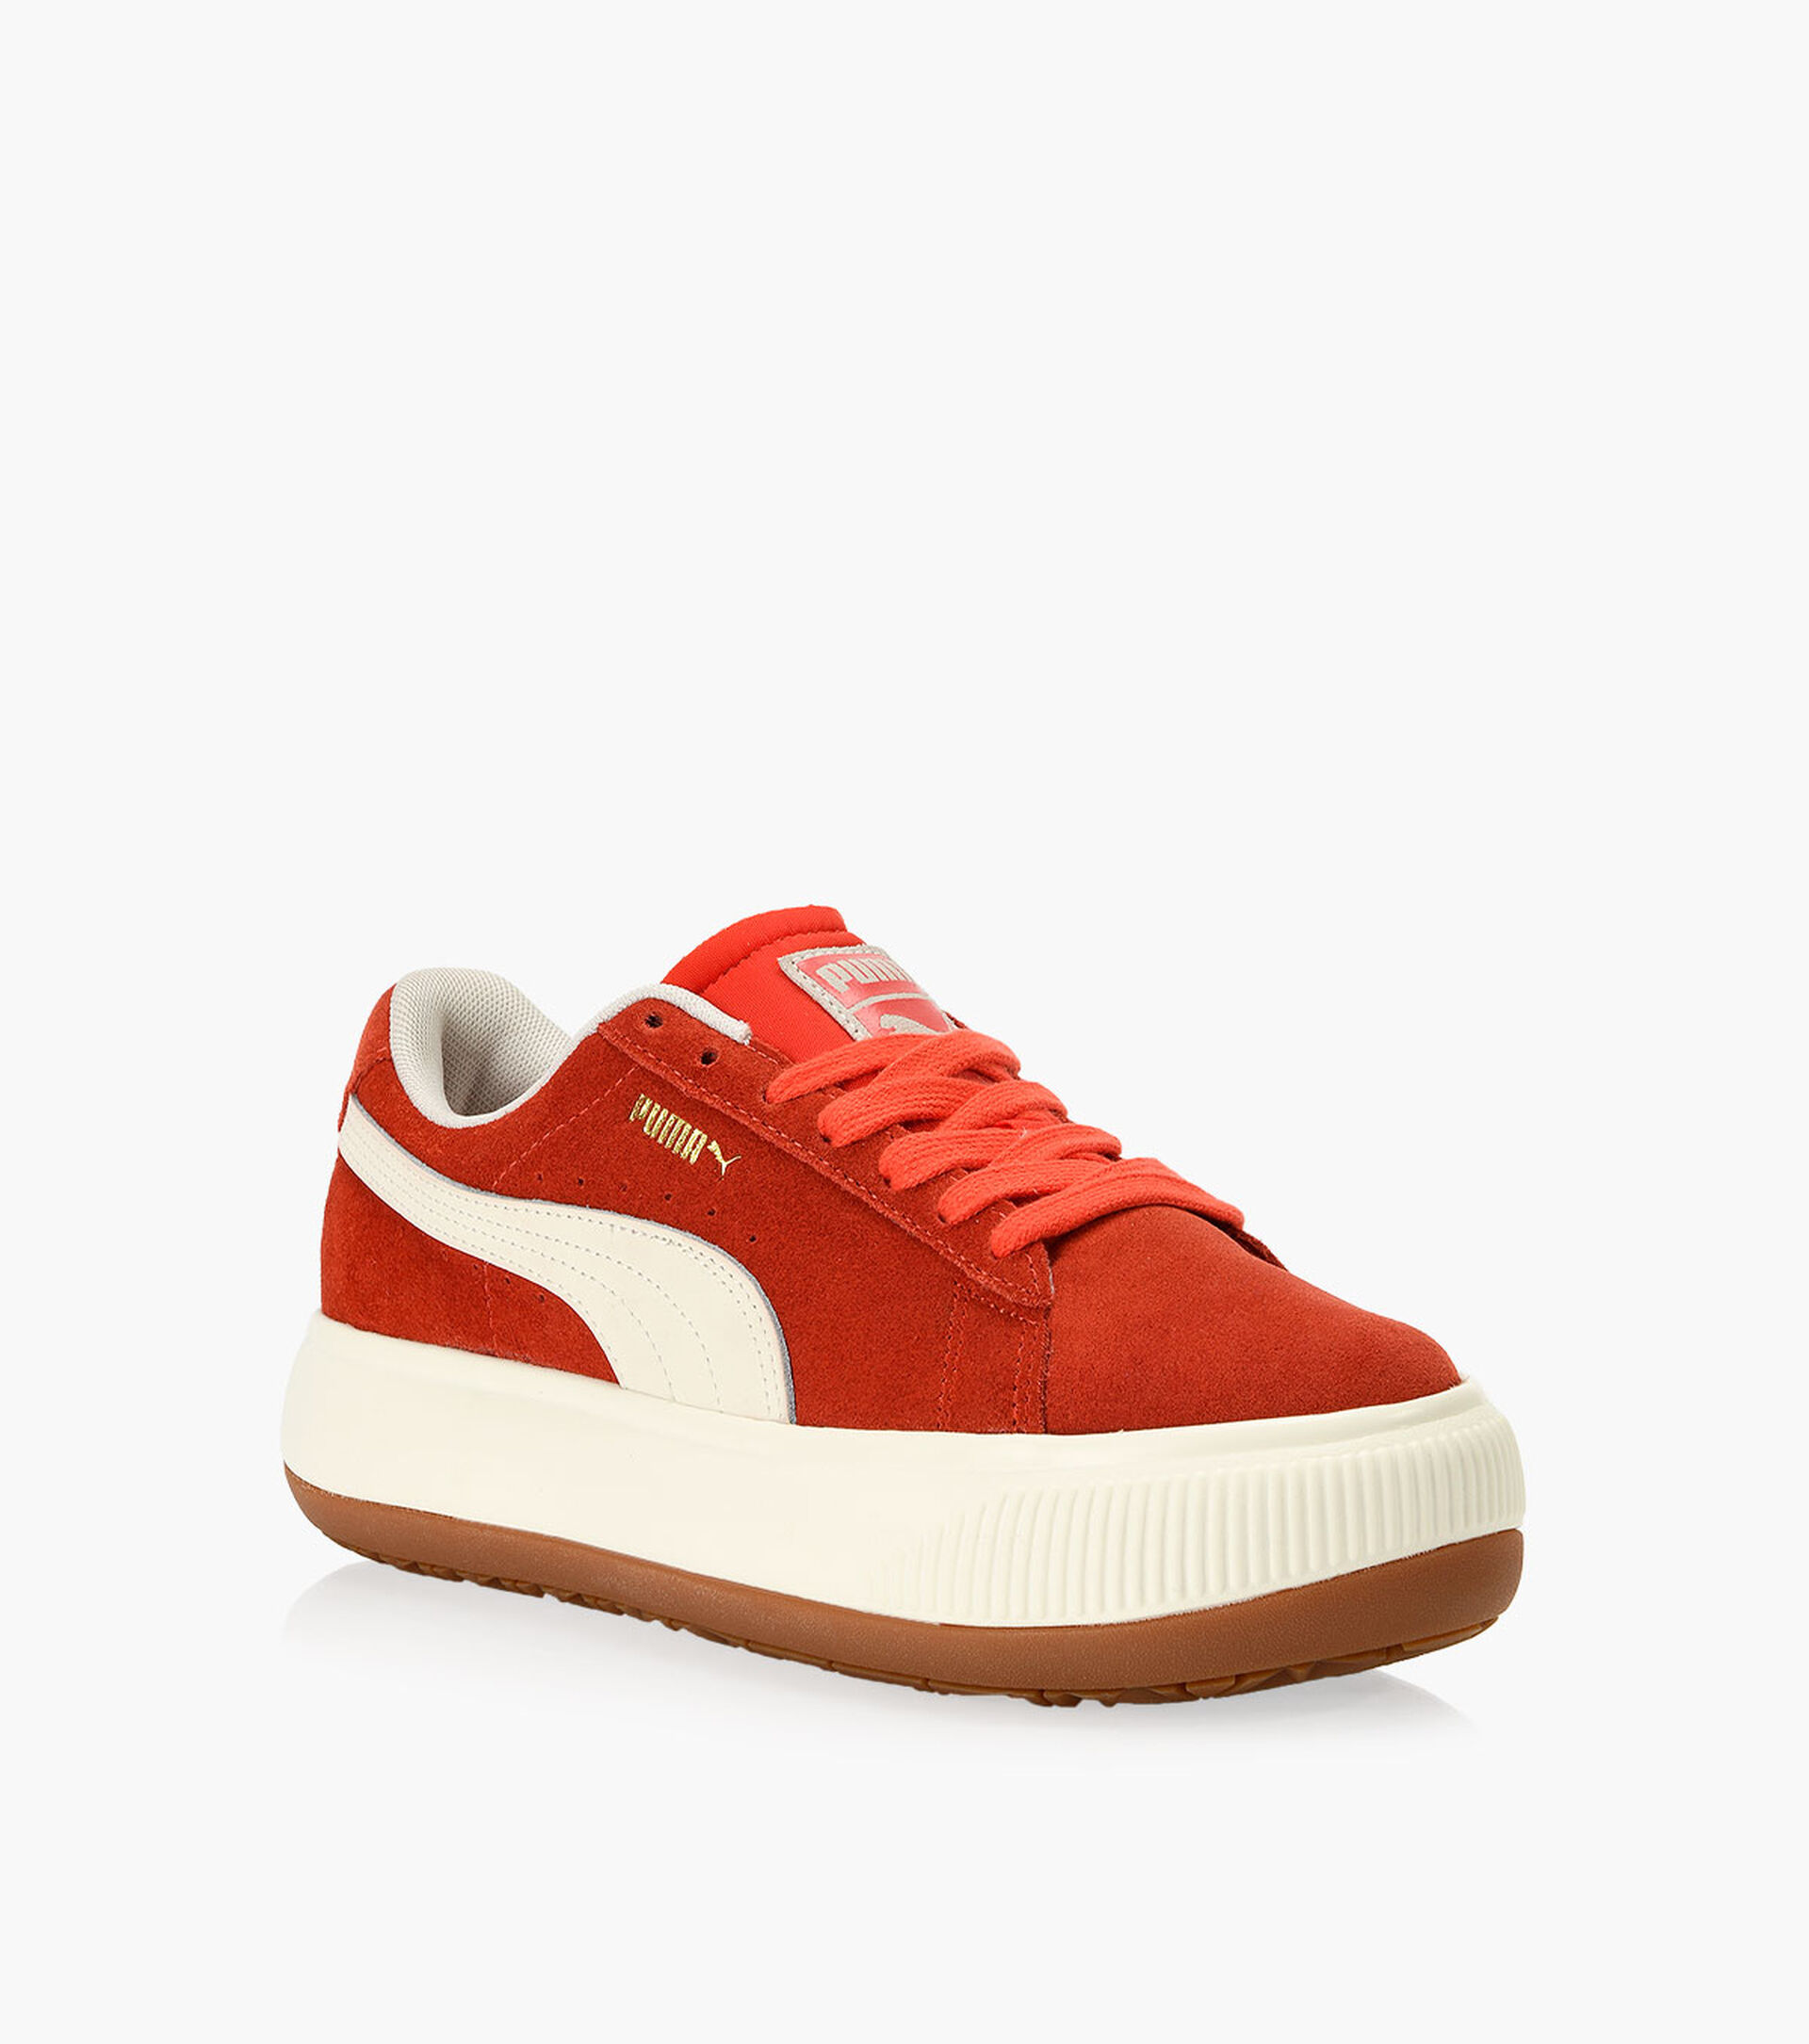 PUMA SUEDE MAYU UP WN'S - Suede | Browns Shoes